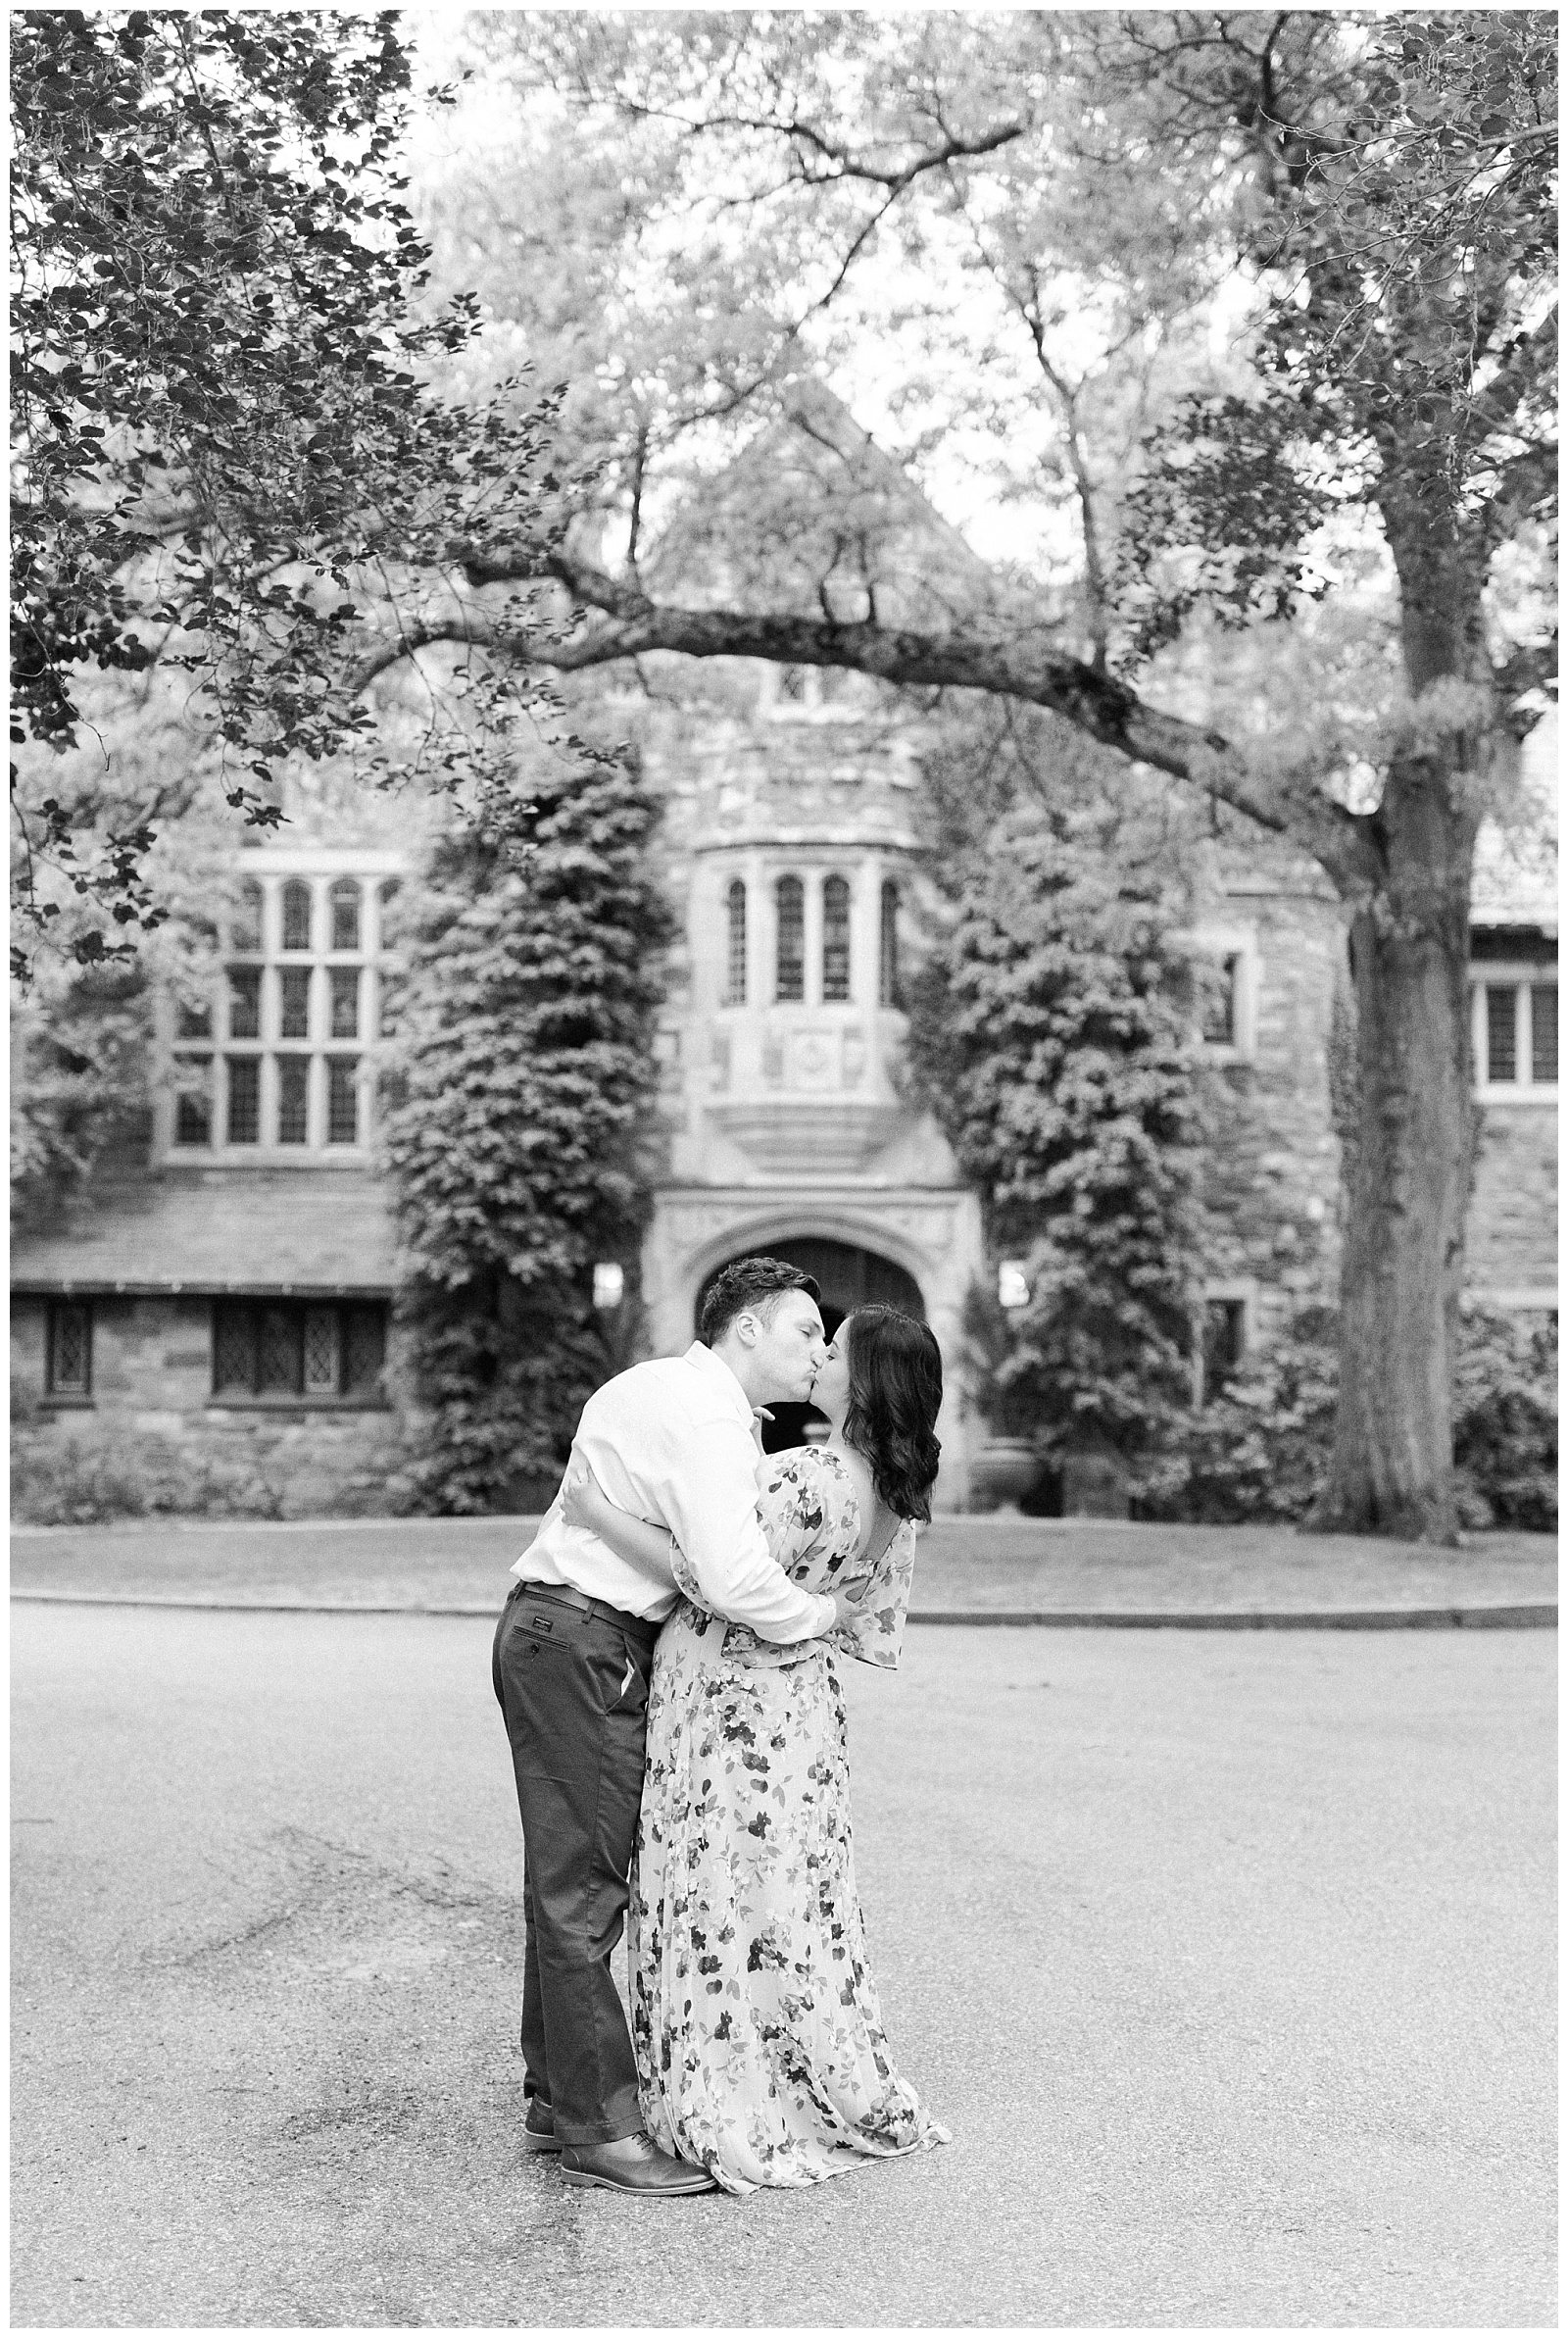 A man kisses his fiancee in front of the Skylands Manor in Ringwood Botanical Garden, NJ.